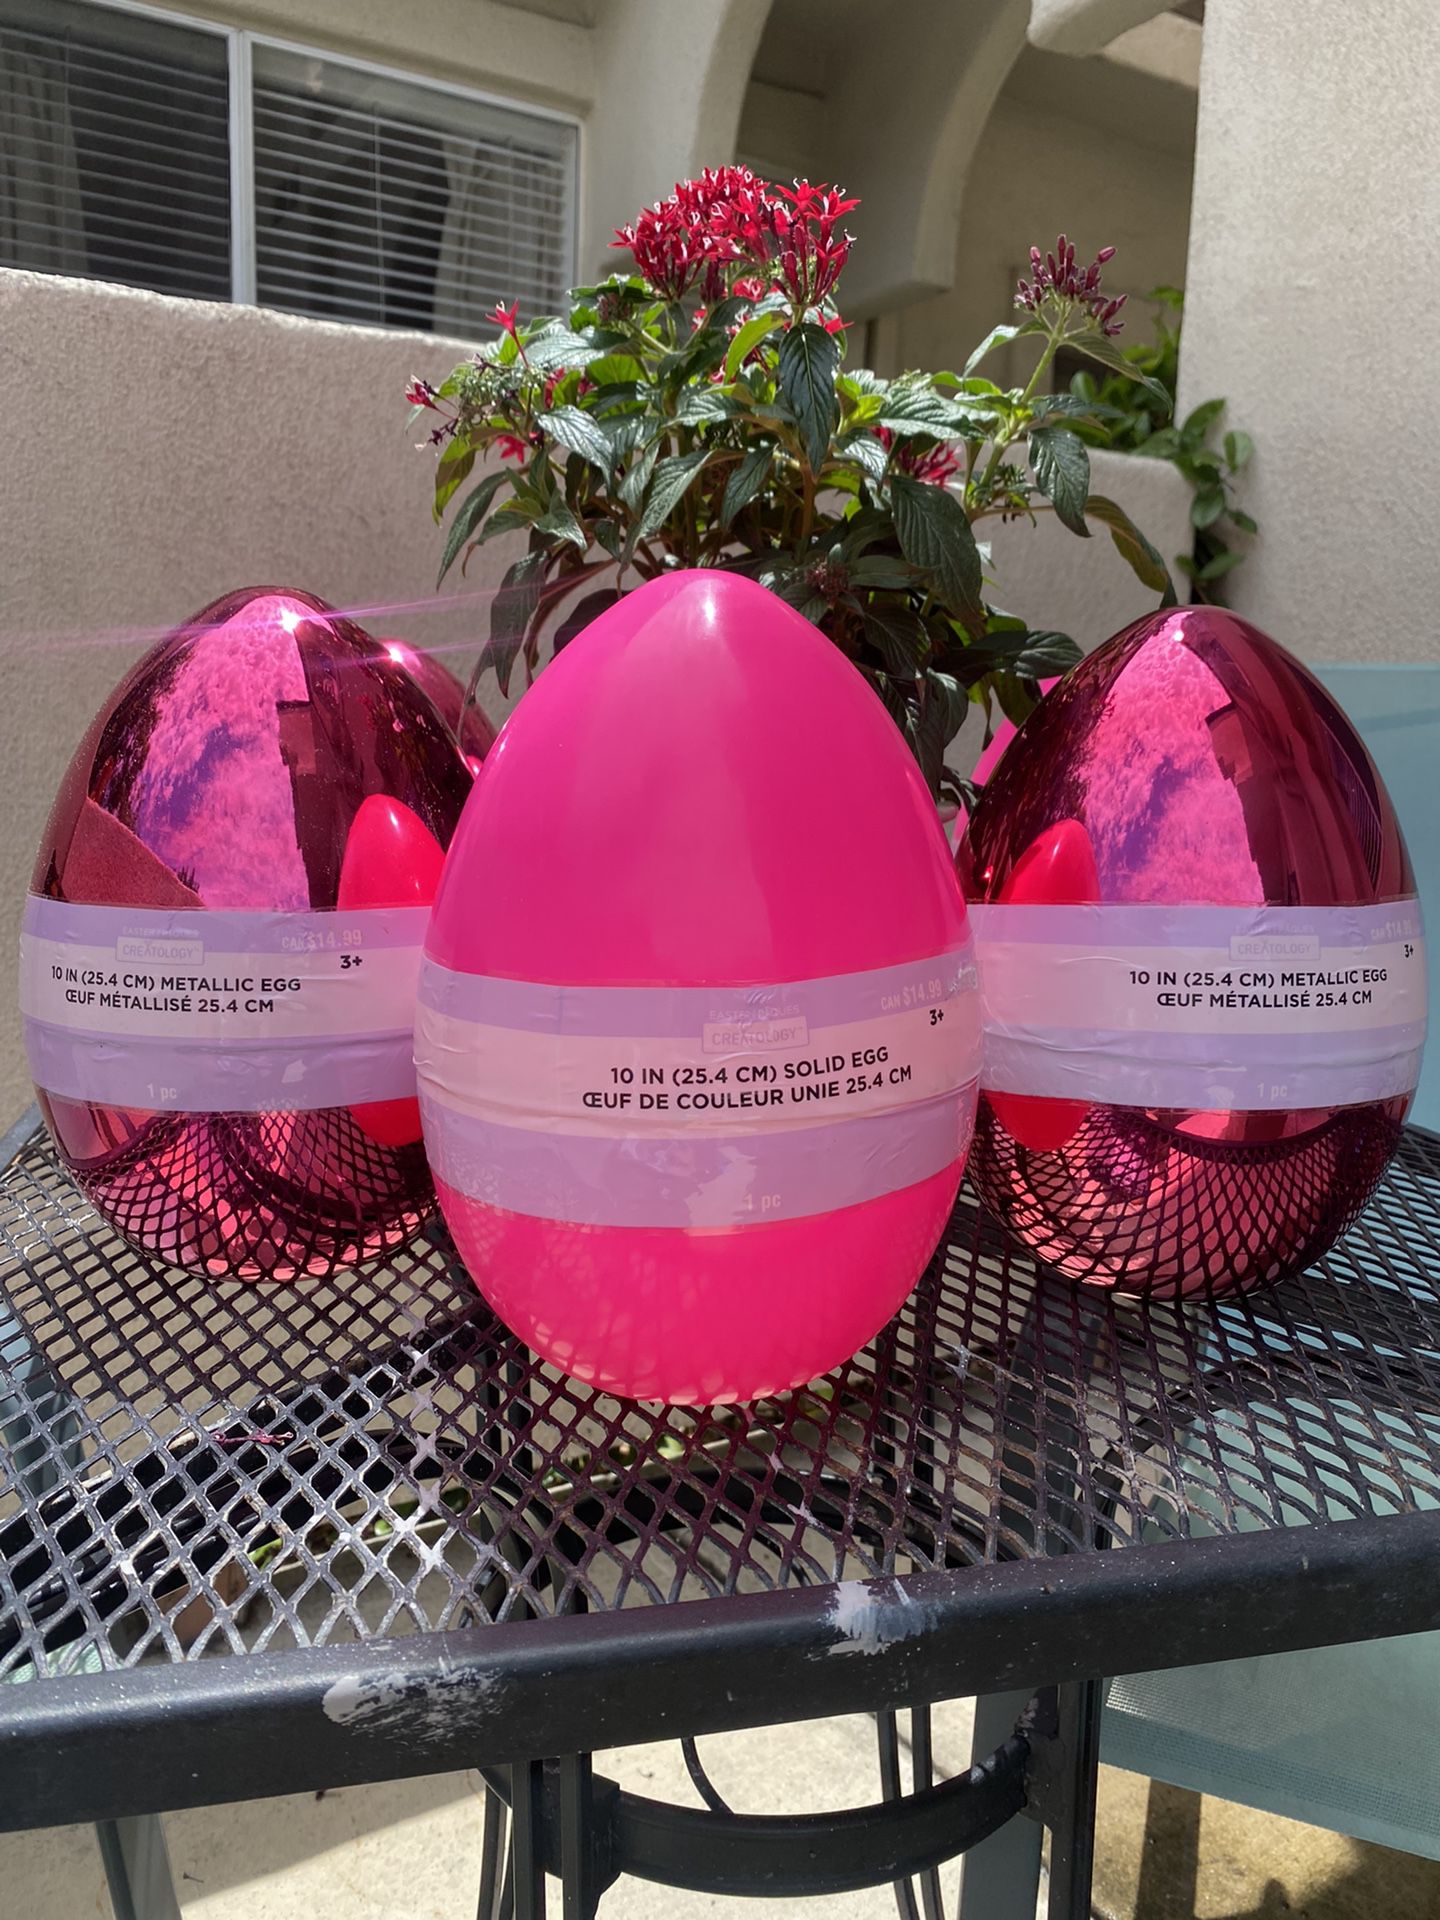 Large Plastic Eggs For Crafts/DIY Or Next Easter 